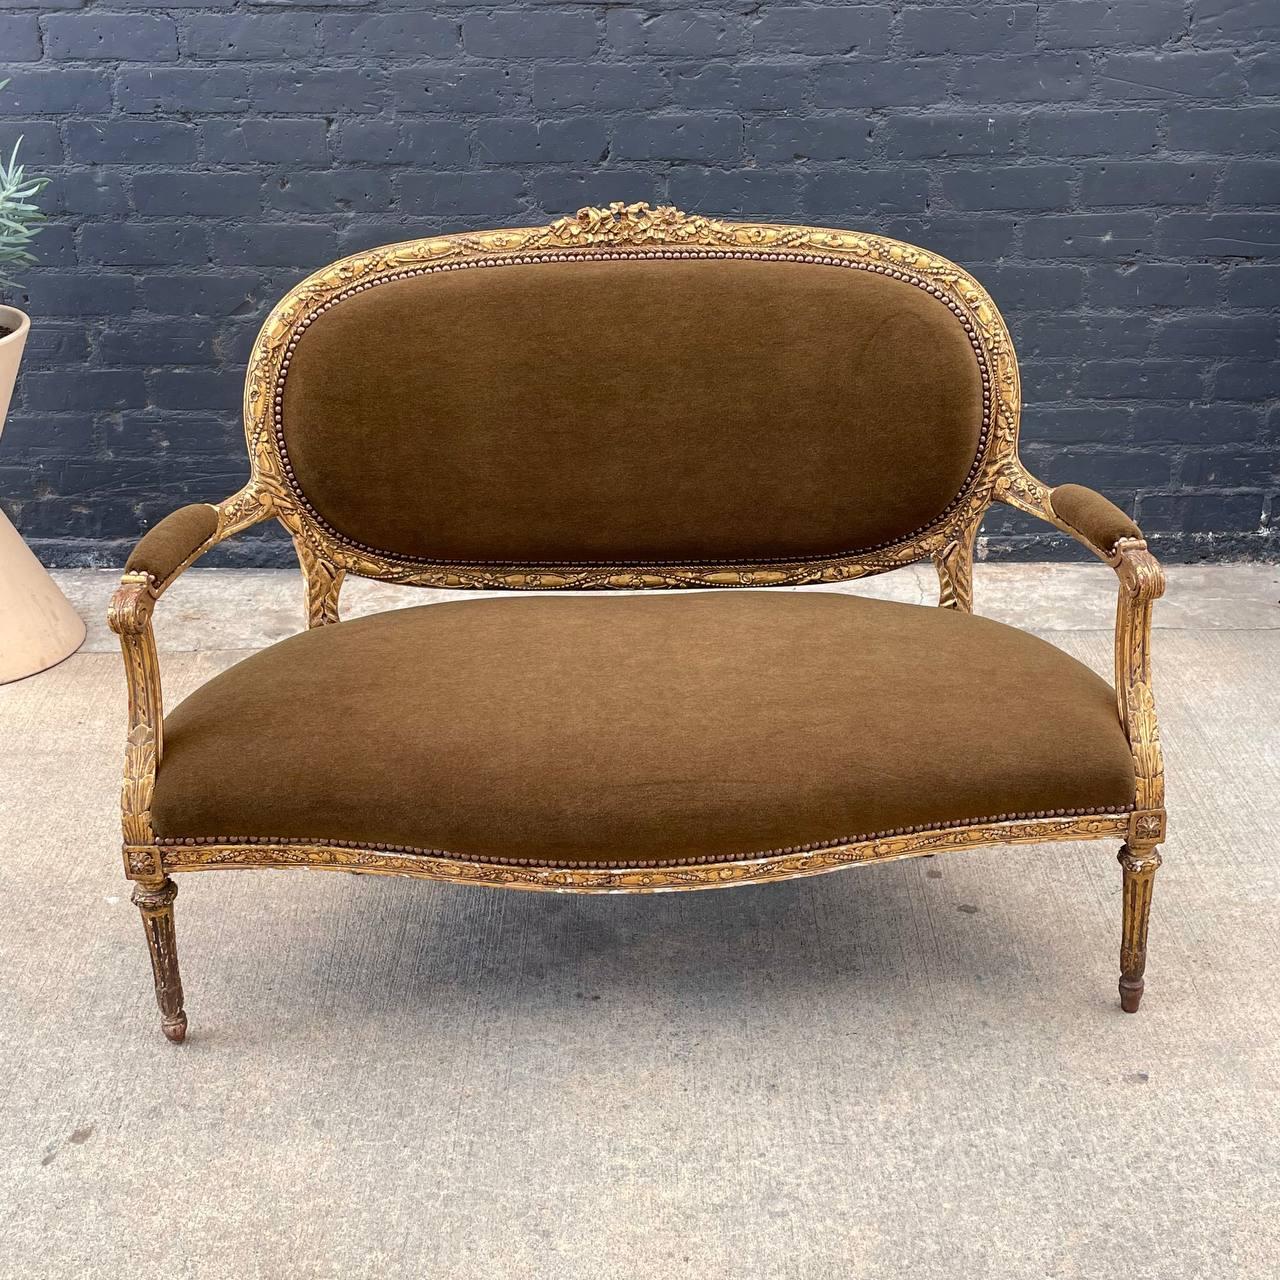 Antique French Louis XVI  Carved Gold Leaf & Alpaca Mohair Sofa 

Country: France
Materials: Carved Gold-Leaf Wood, New Alpaca Mohair 
Condition: Newly Reupholstered, New Alpaca Mohair 
Style: French Louis XVI 
Year: 1920’s

$4,895

Dimensions:
39”H